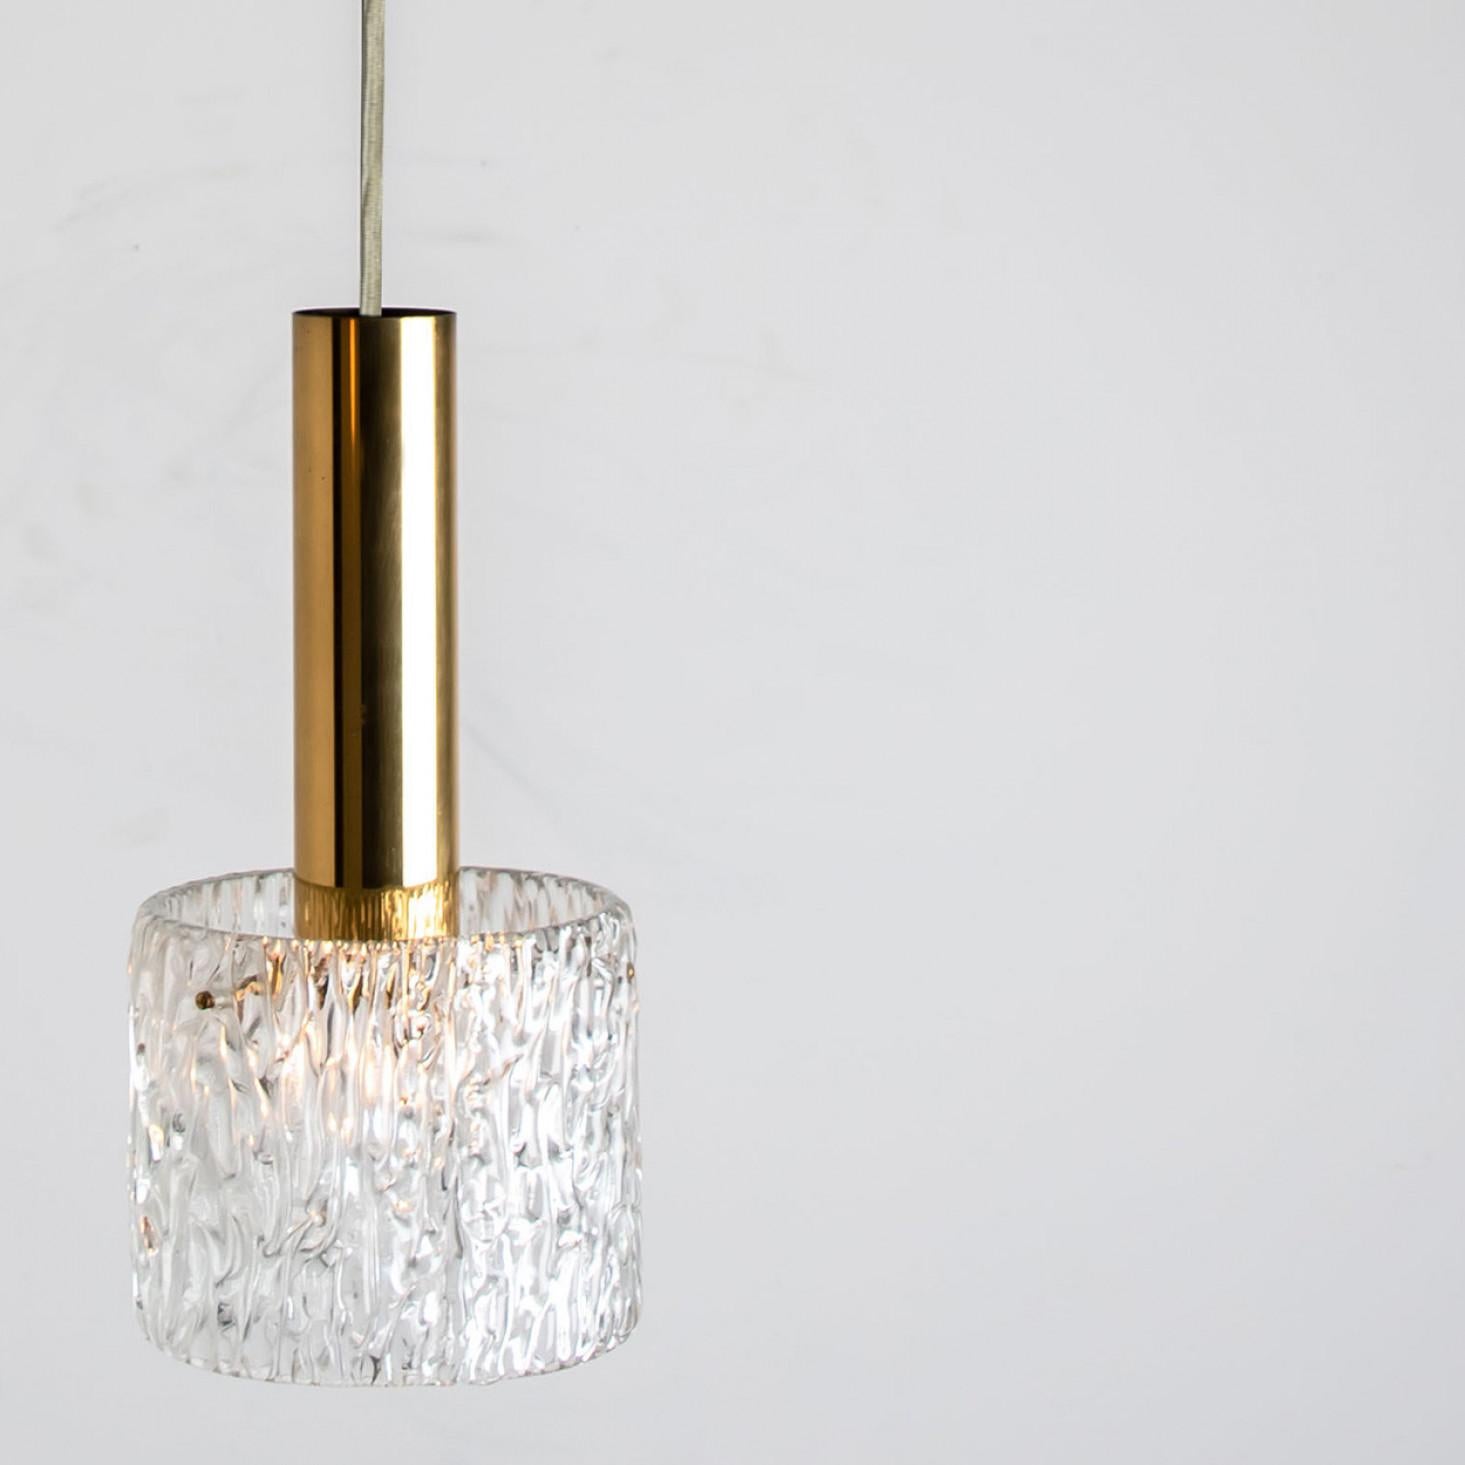 One of Three Wave Glass Pendant Lights by J.T. Kalmar, 1960s For Sale 5